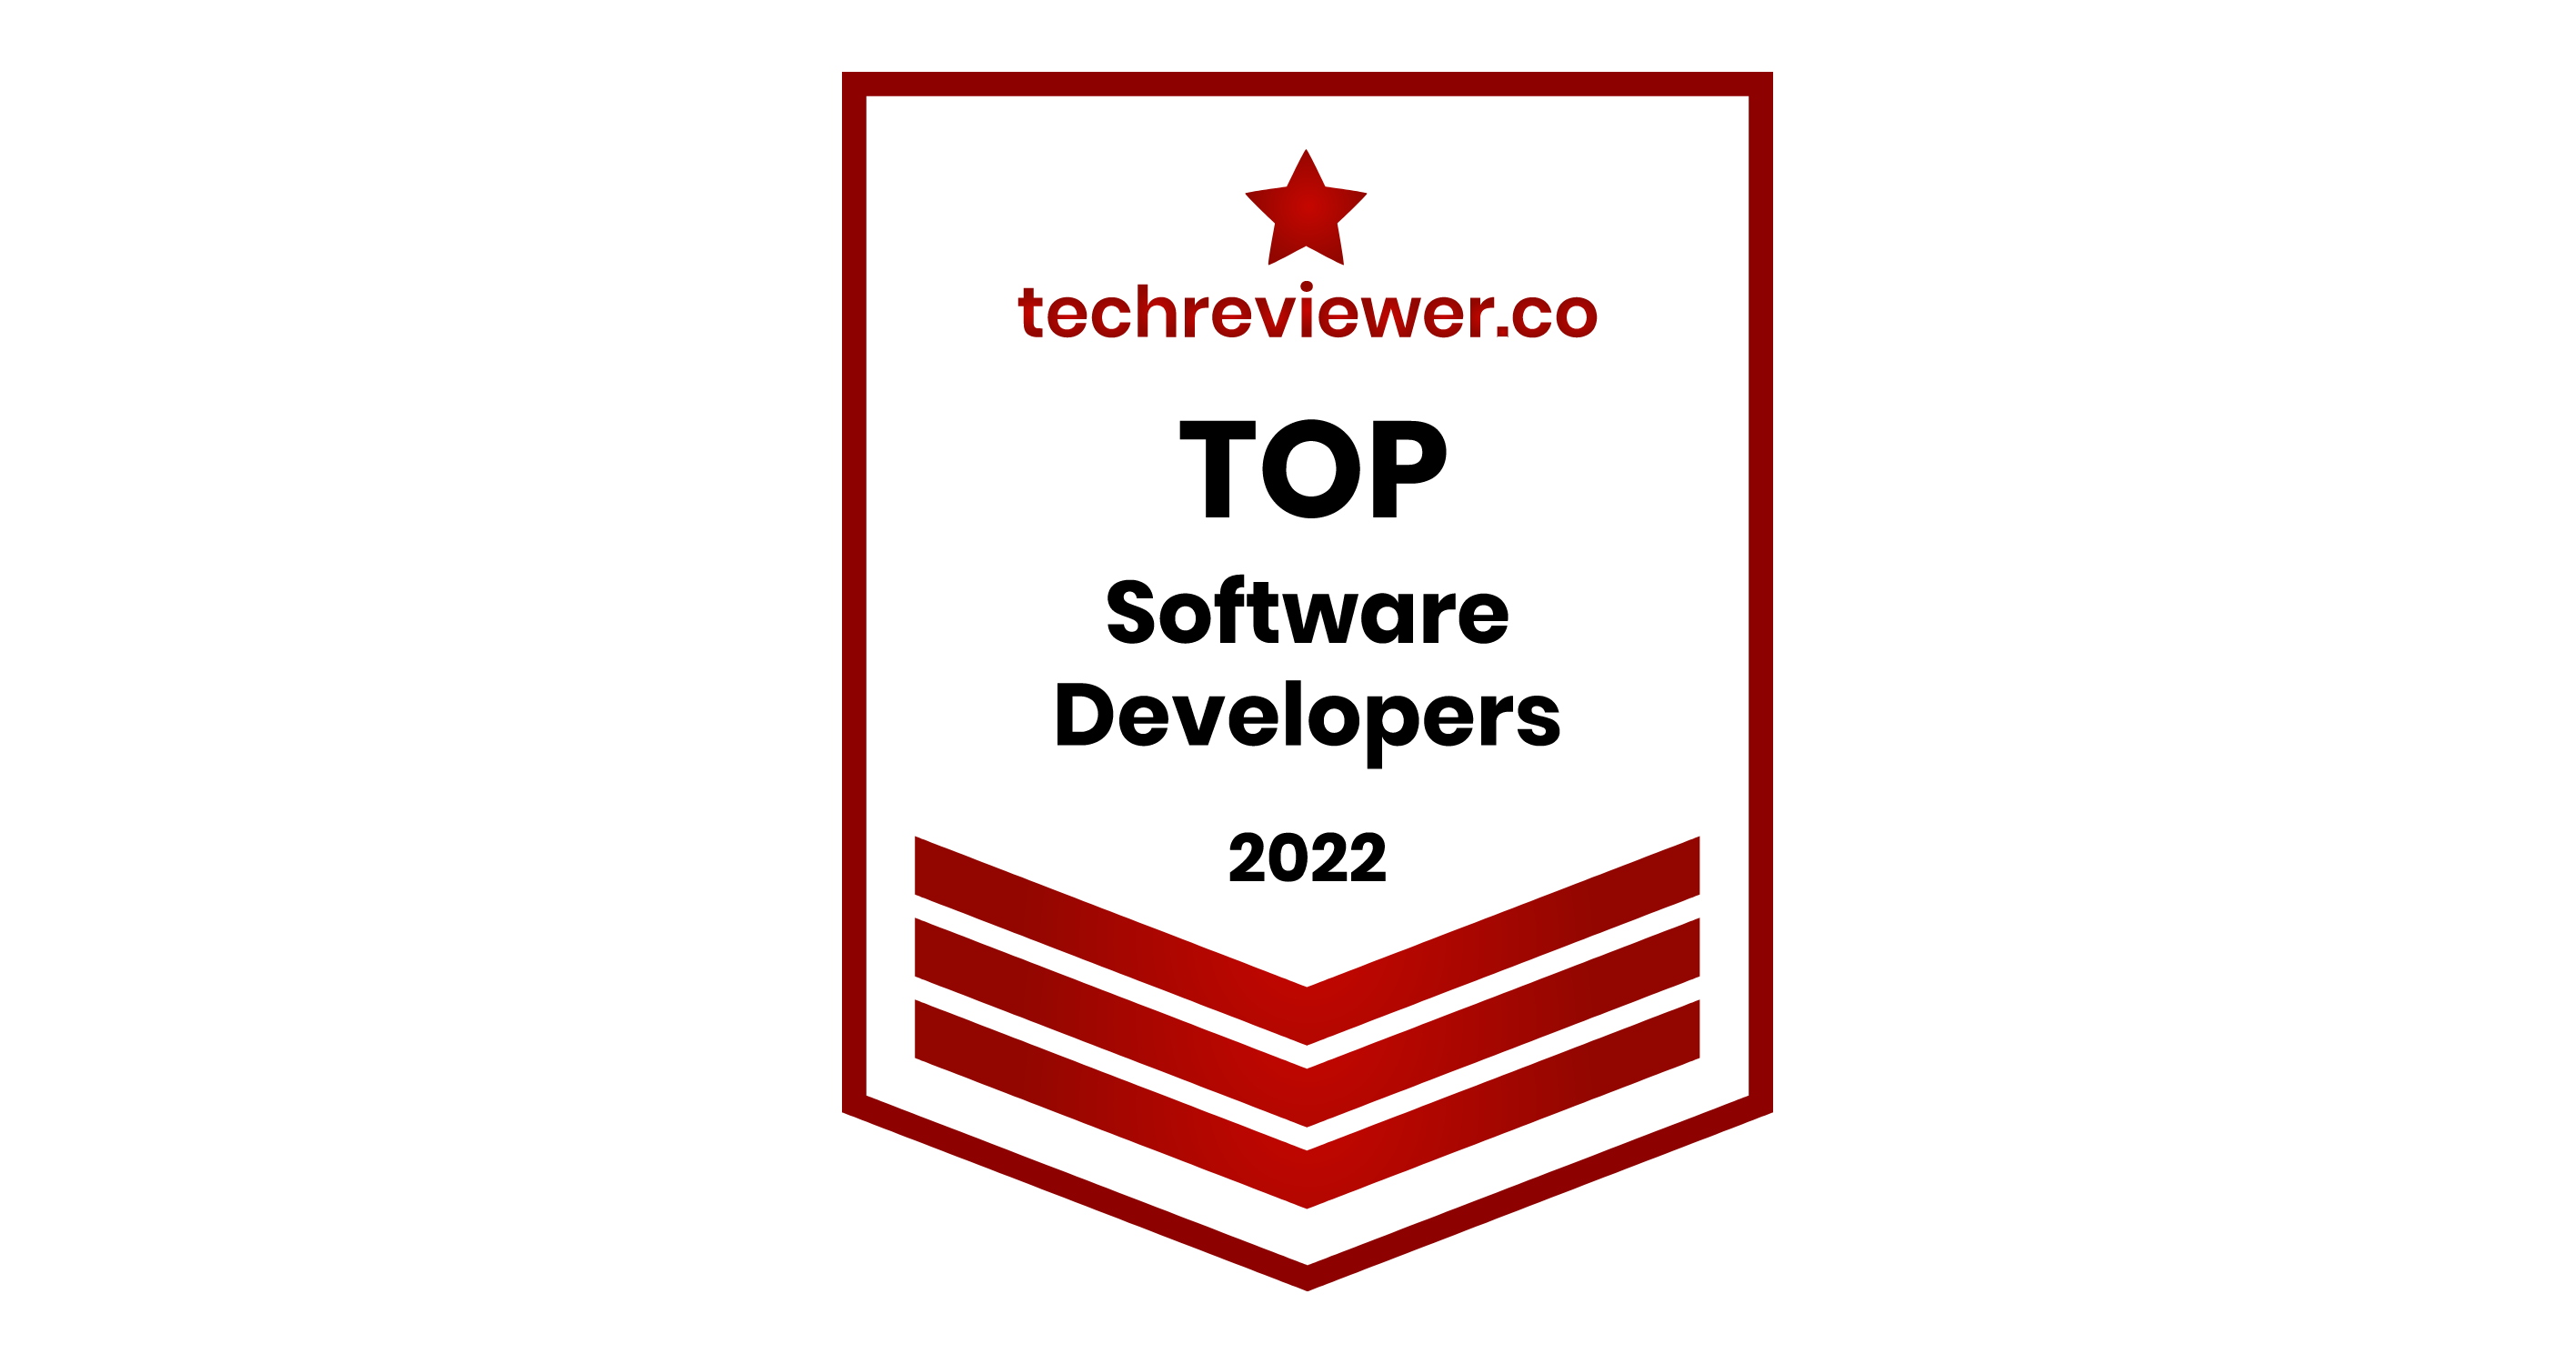 Dynamsoft Featured in Techreviewer’s List of Top Software Development Companies for 2022